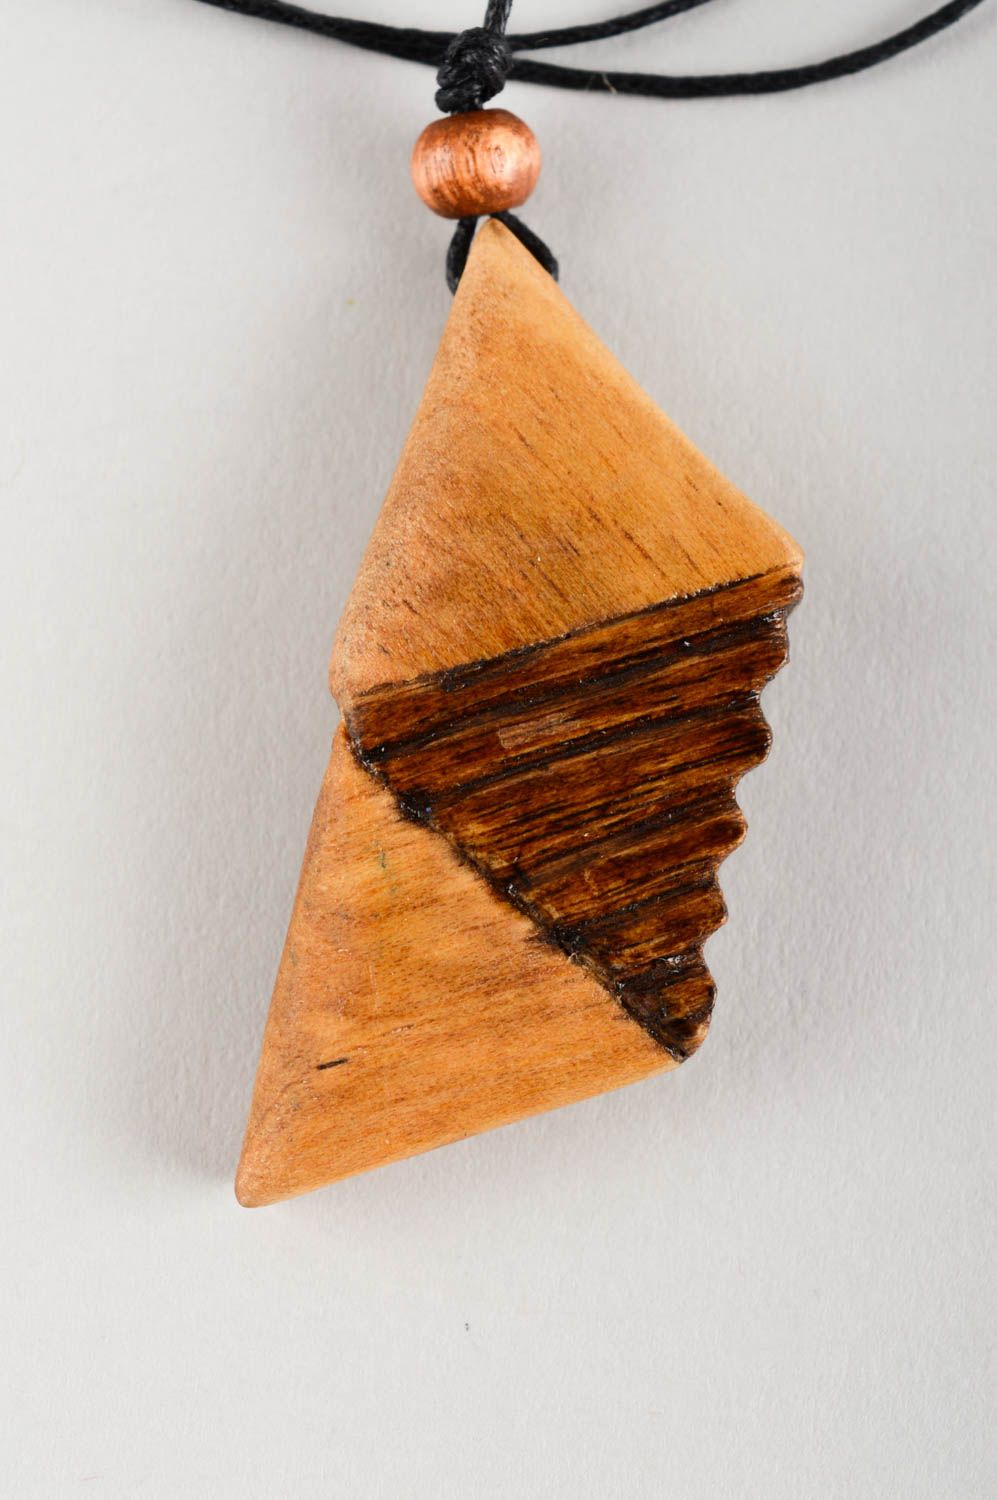 Stylish handmade wooden pendant artisan jewelry designs wood craft gifts for her photo 3